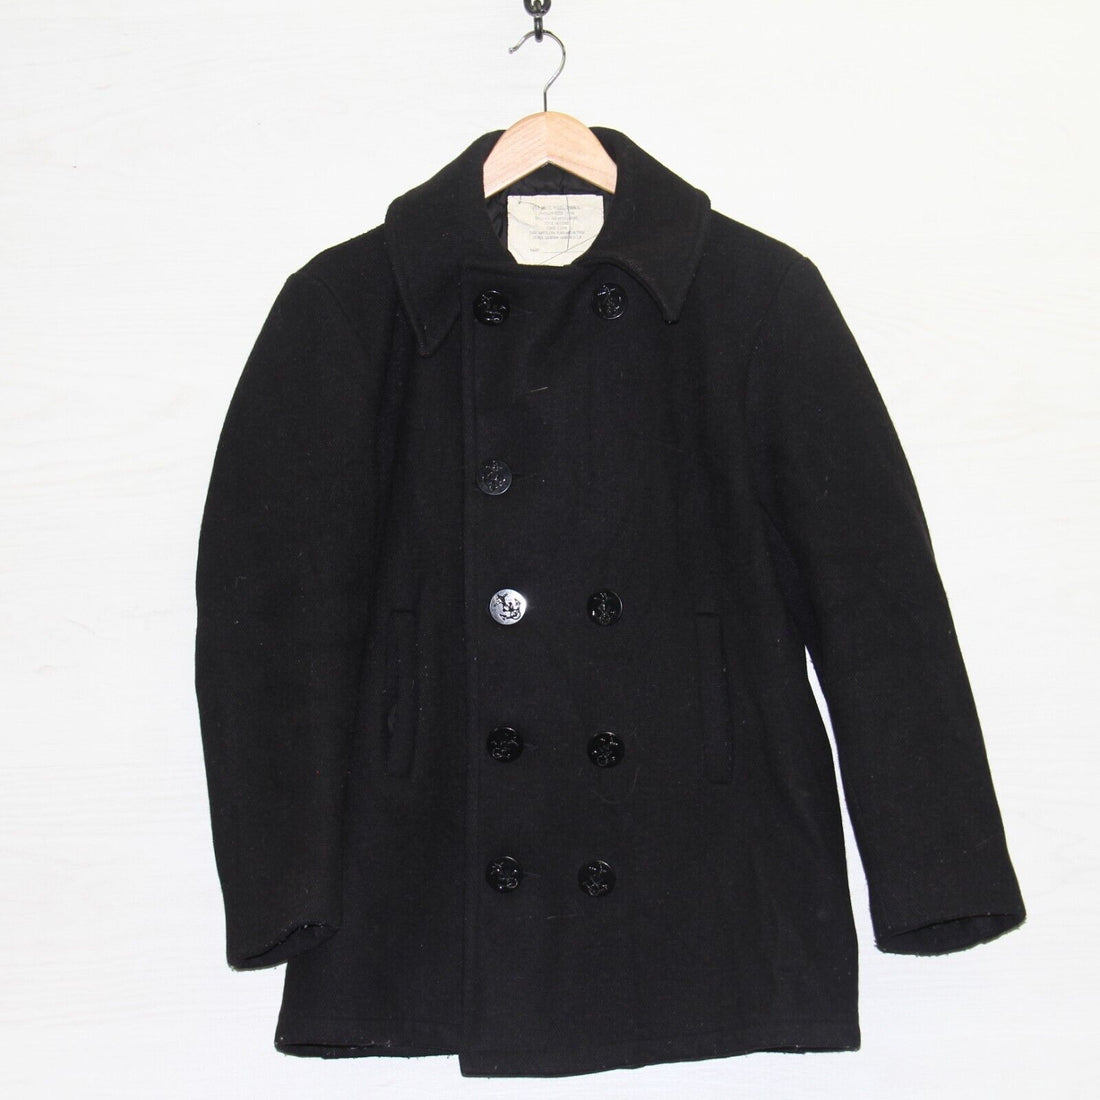 Vintage US Navy Military Wool Pea Coat Size 36 Made USA Black 80s